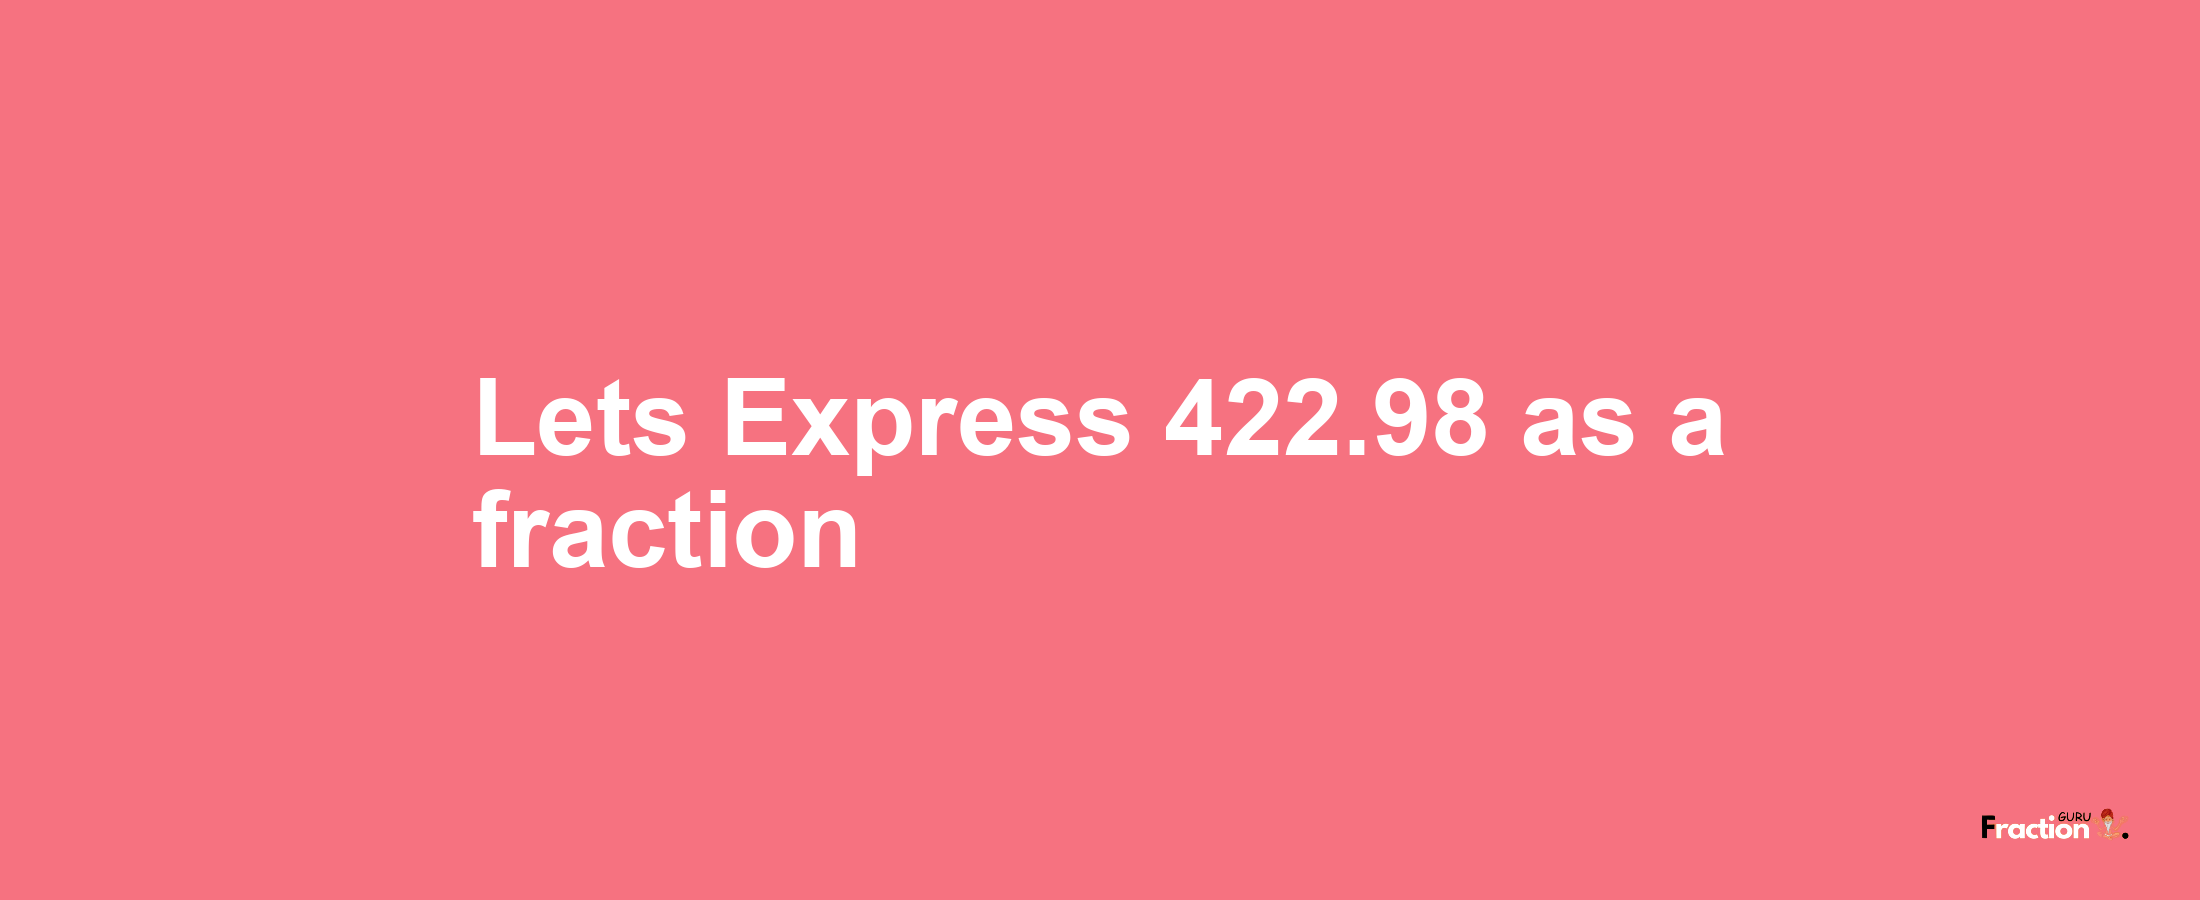 Lets Express 422.98 as afraction